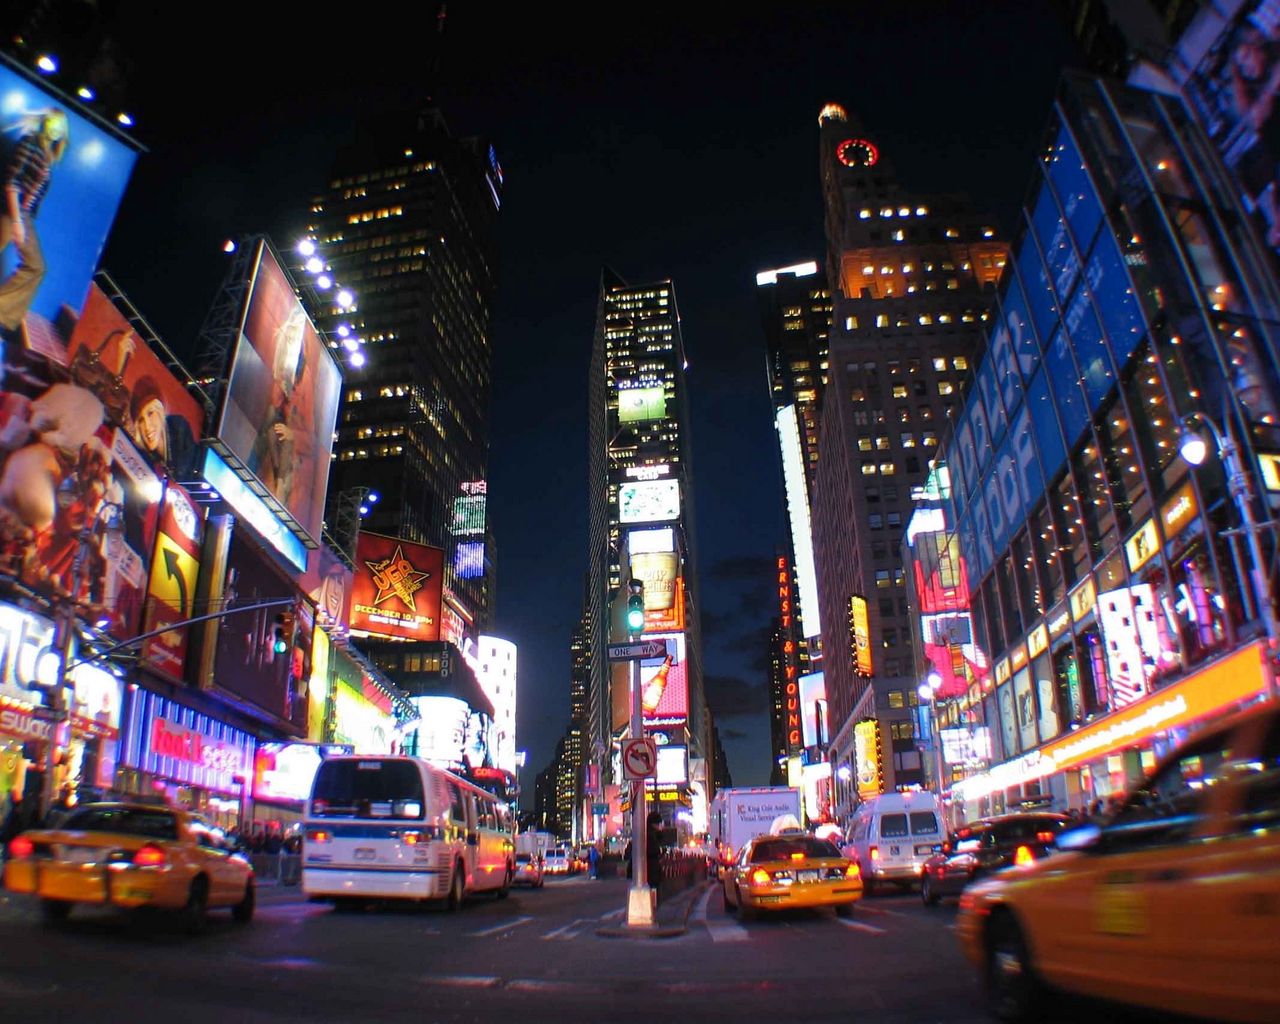 Download wallpaper 1280x1024 new york, city, night, lights, times square  standard 5:4 hd background